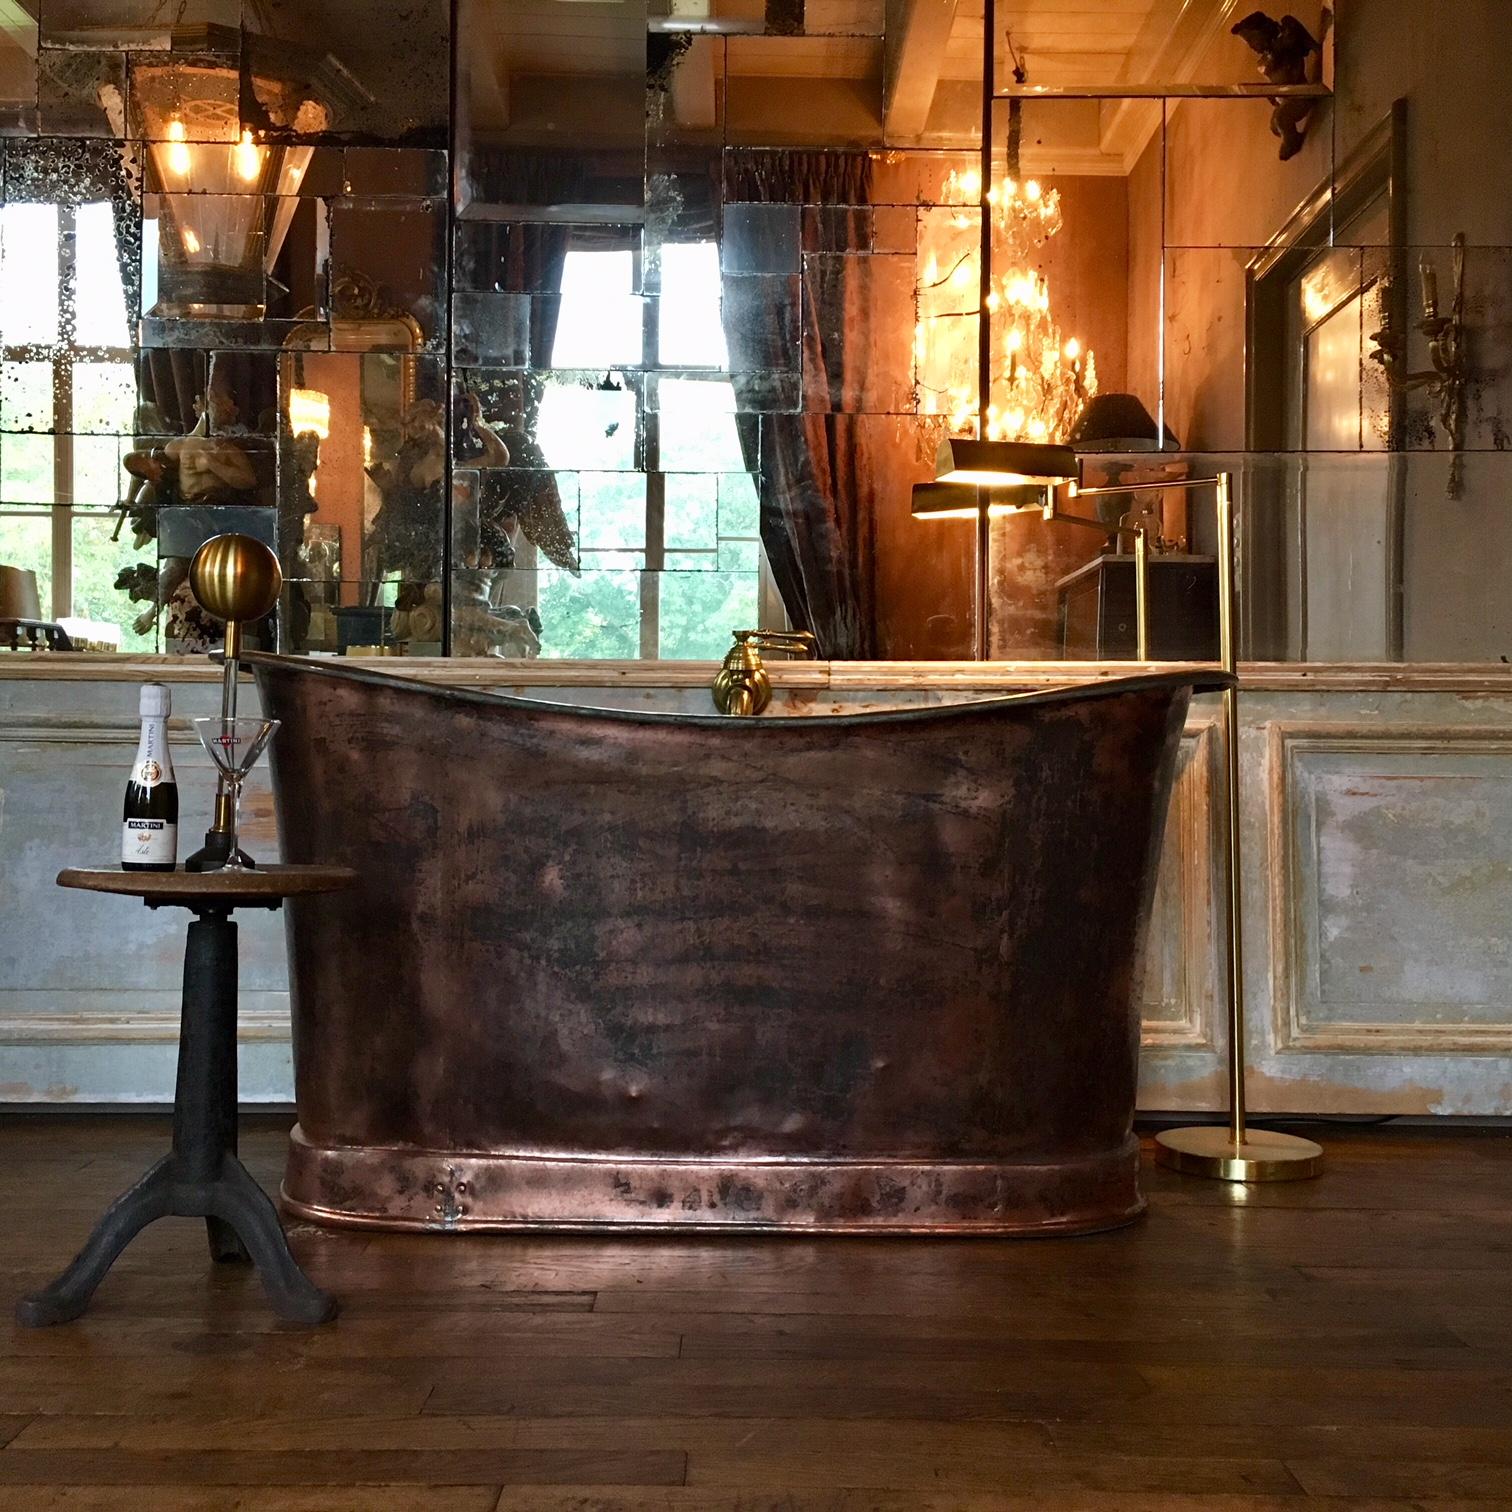 Beautiful copper tub made in the early 19th century. In this model tub you have to bathe sitting, that is why the tub is very high. The copper has been polished in a rough manner to create a beautiful stained effect. The drain is placed in the